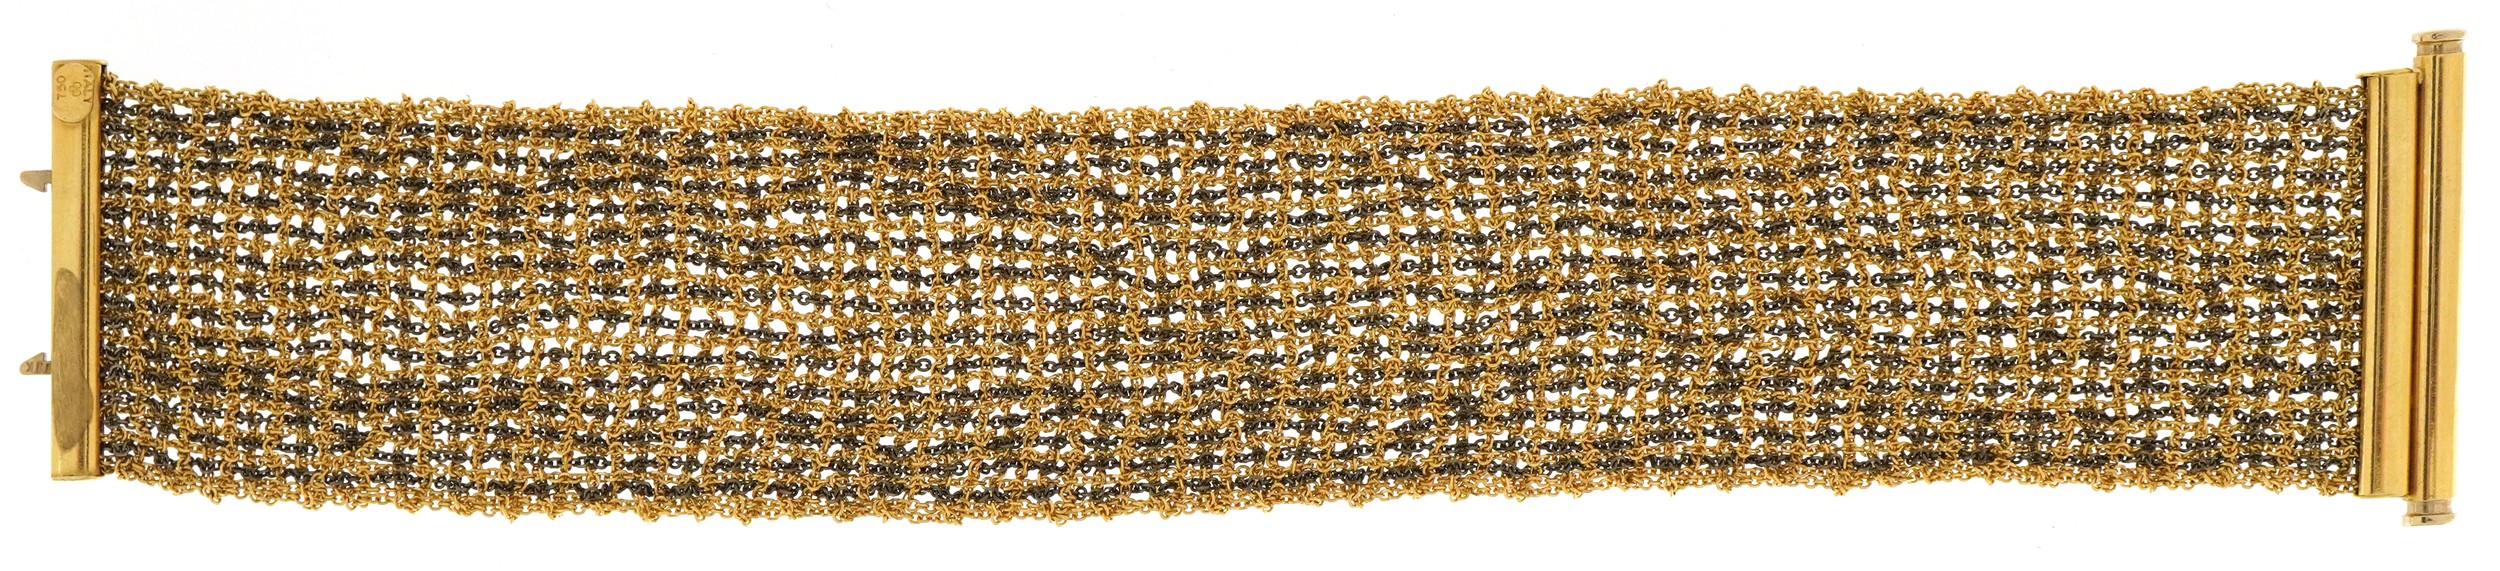 Good quality Italian 18ct two tone gold mesh bracelet, 18cm in length, 39.7g - Image 2 of 4